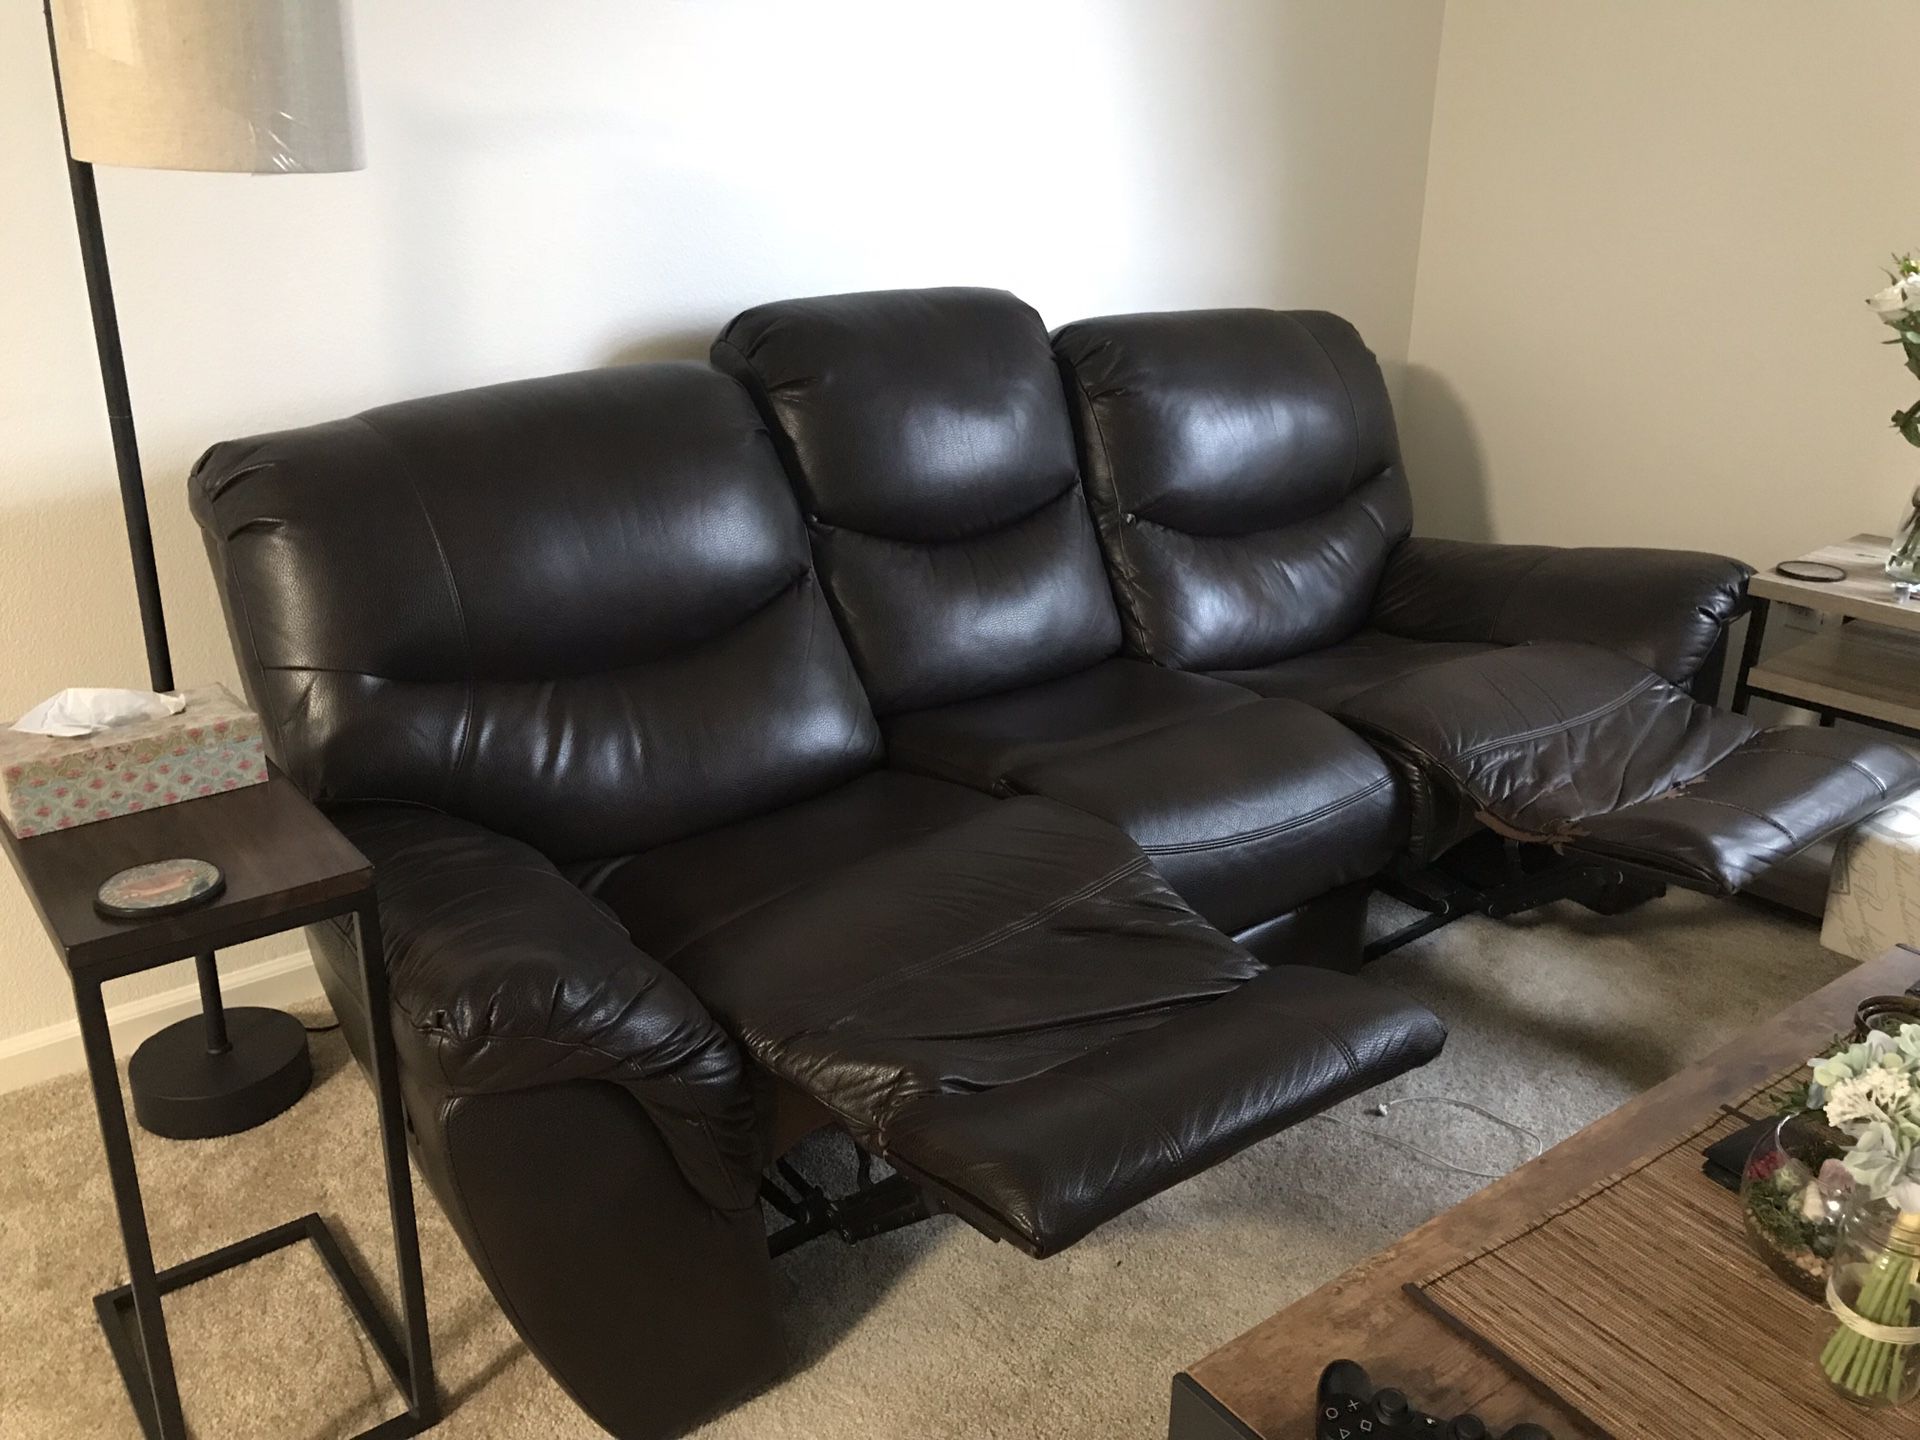 Free vinyl couch - torn at one foot rest but reclining works perfectly